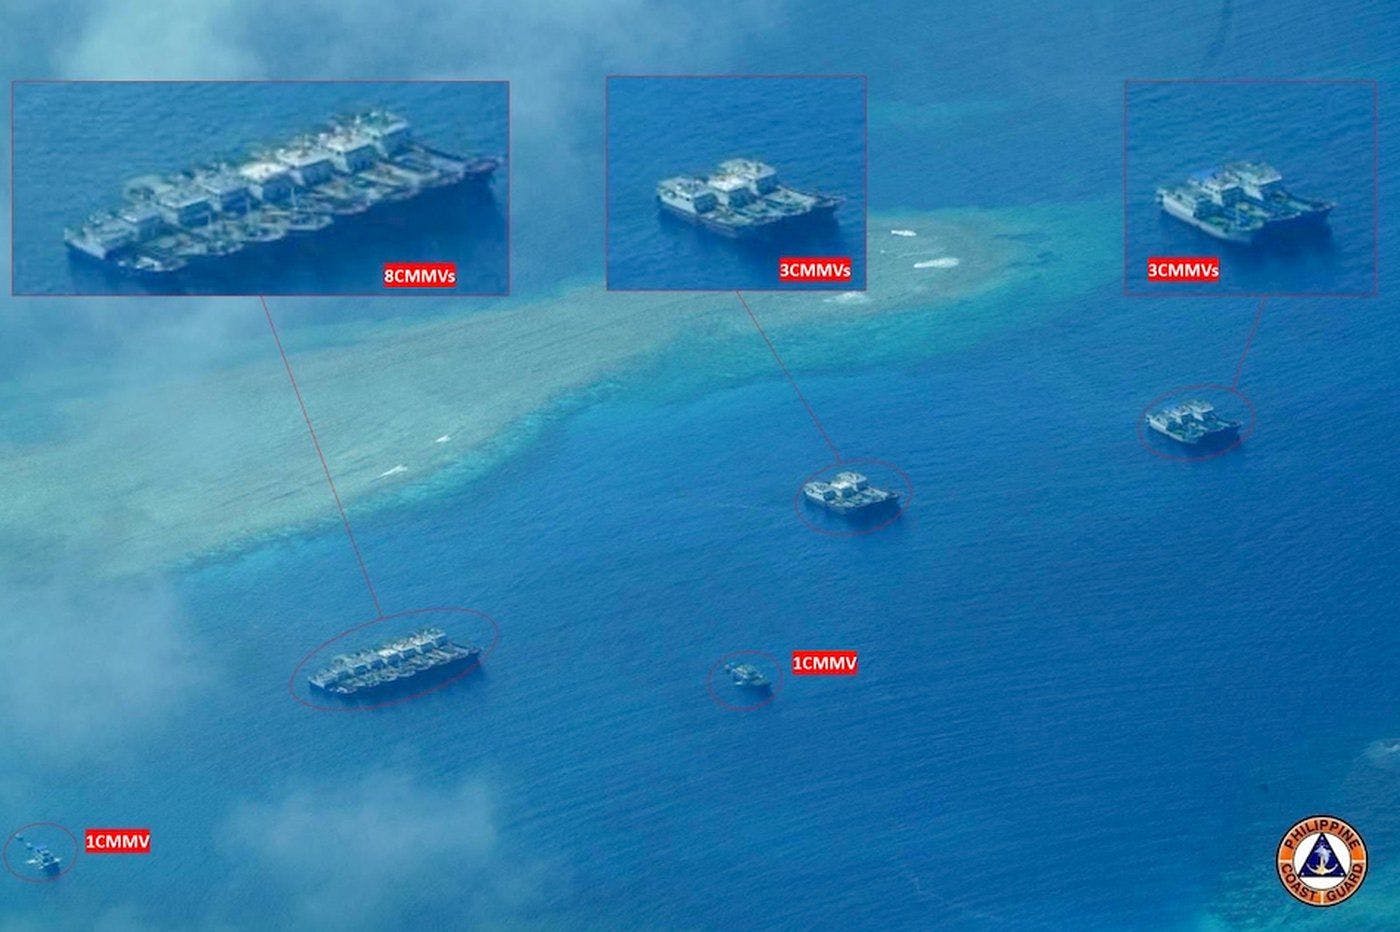 China's South China Sea Reclamation Damages Coral, Threatens Philippines' EEZ